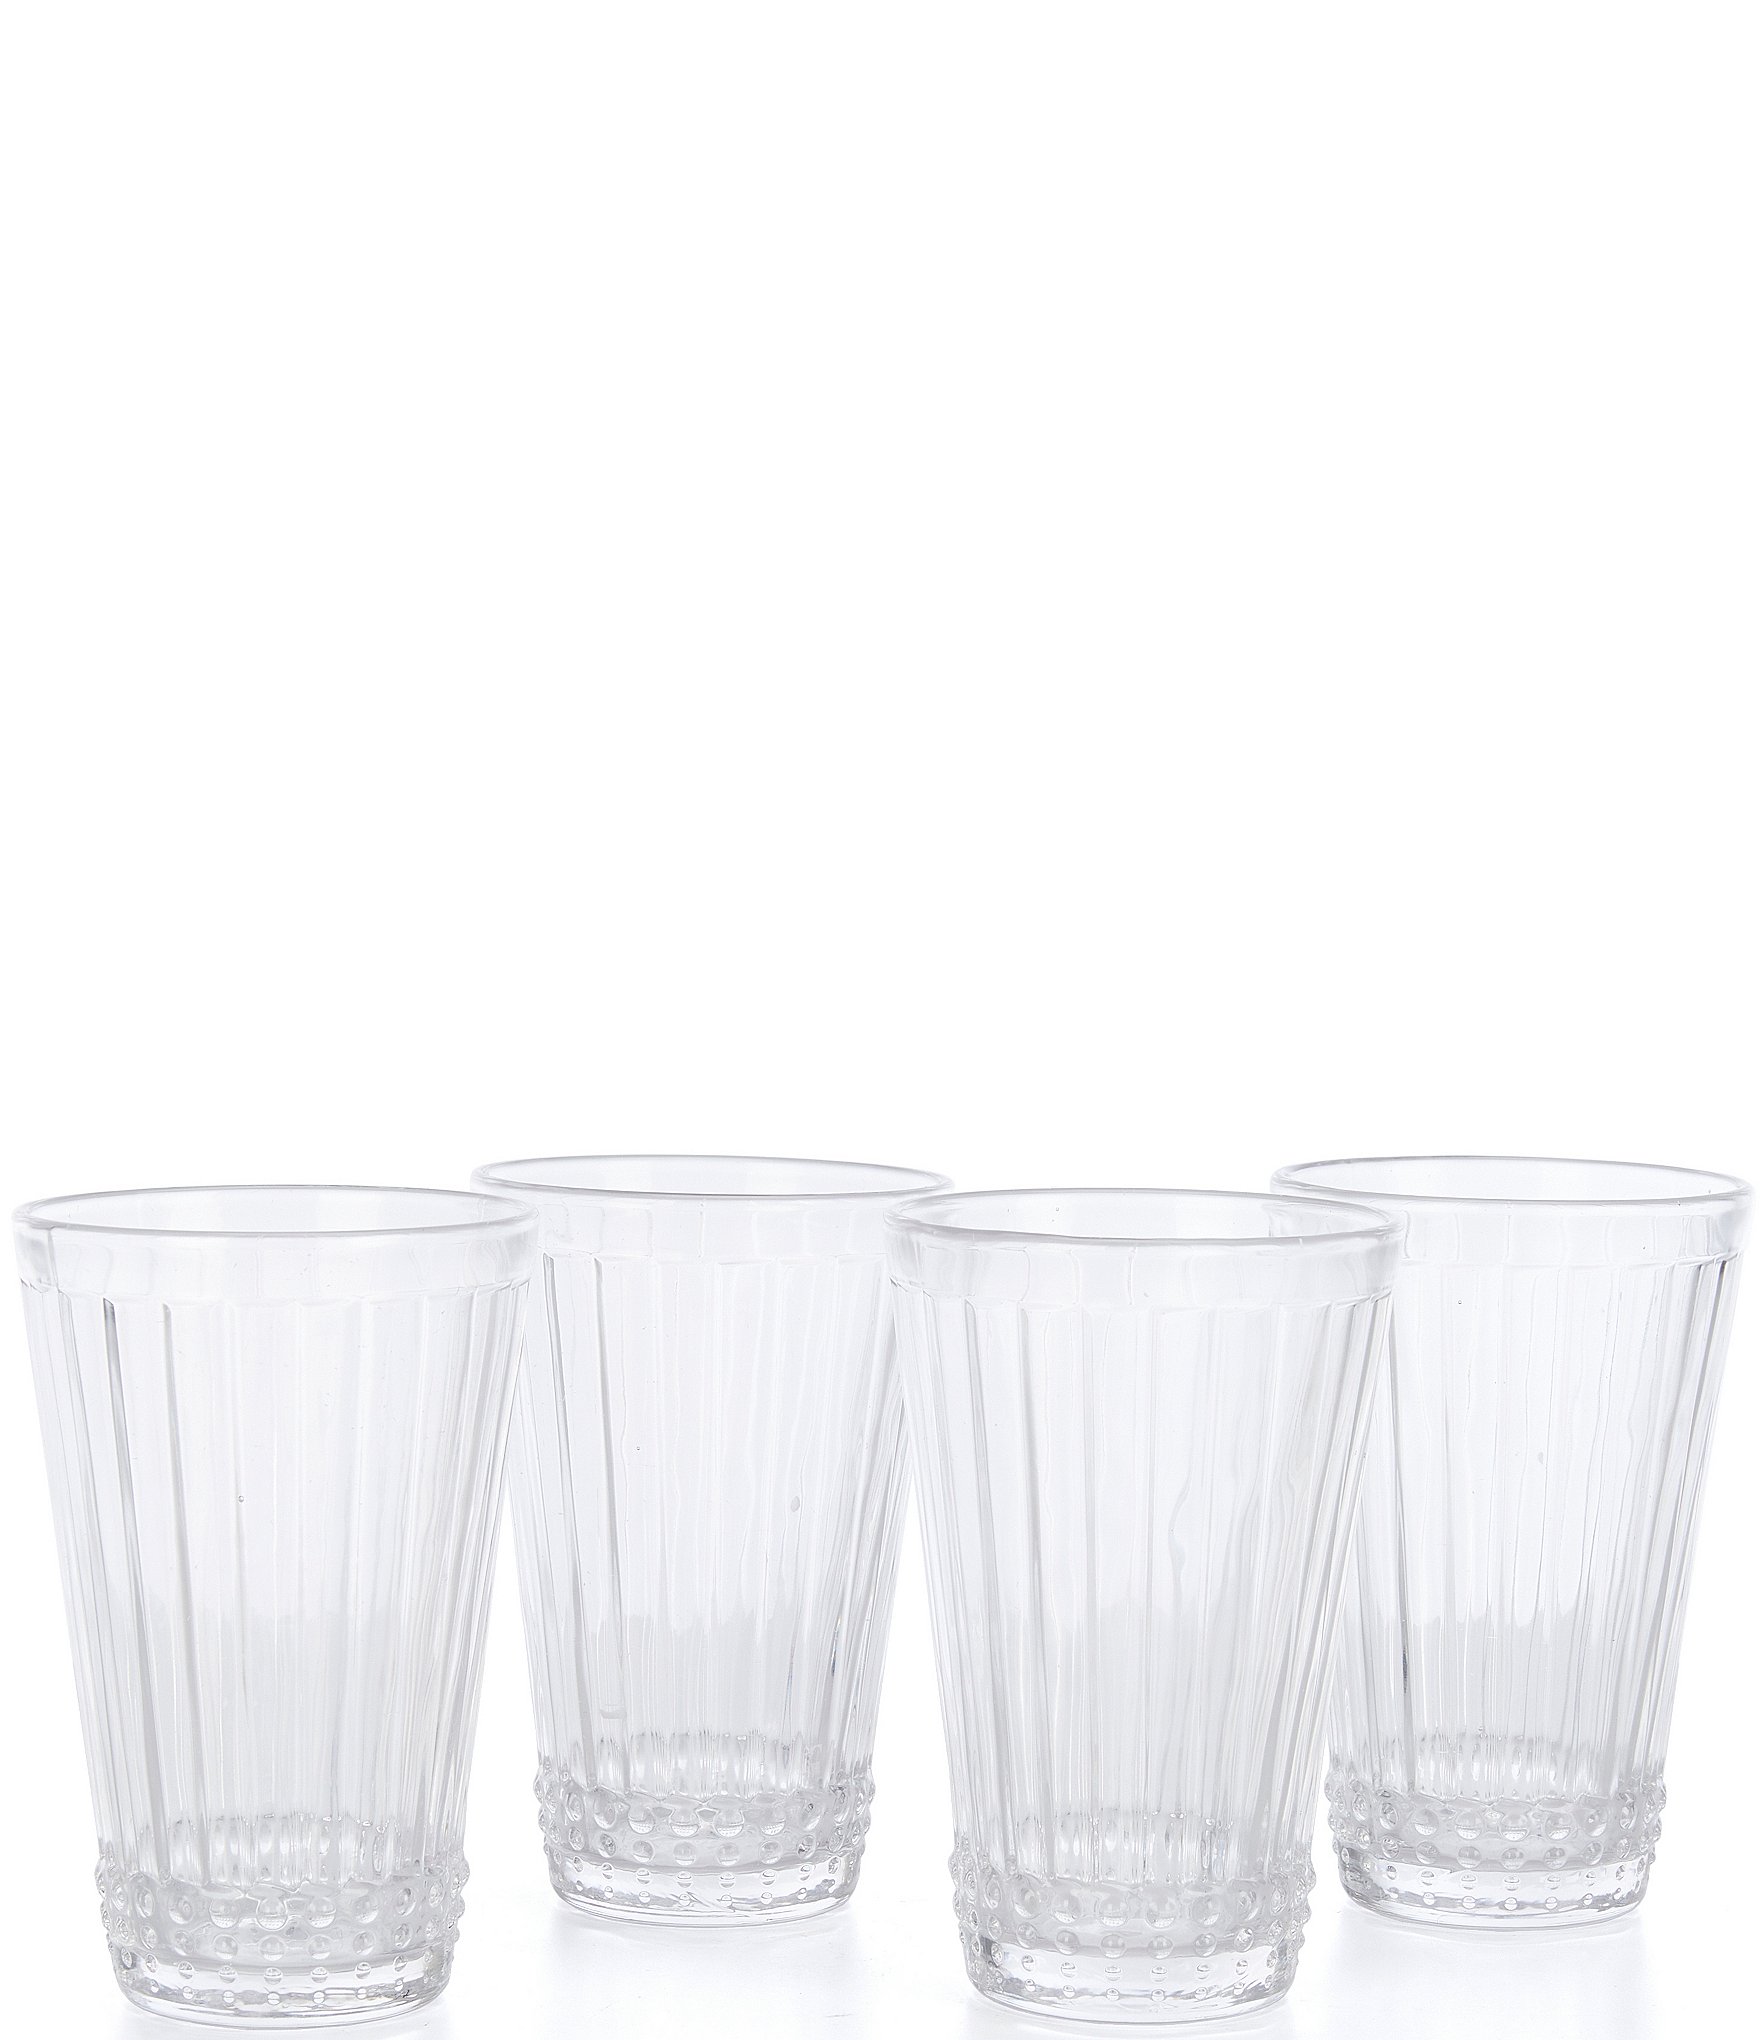 Year & Day Plain Short Glasses, Set of 4 - Clear